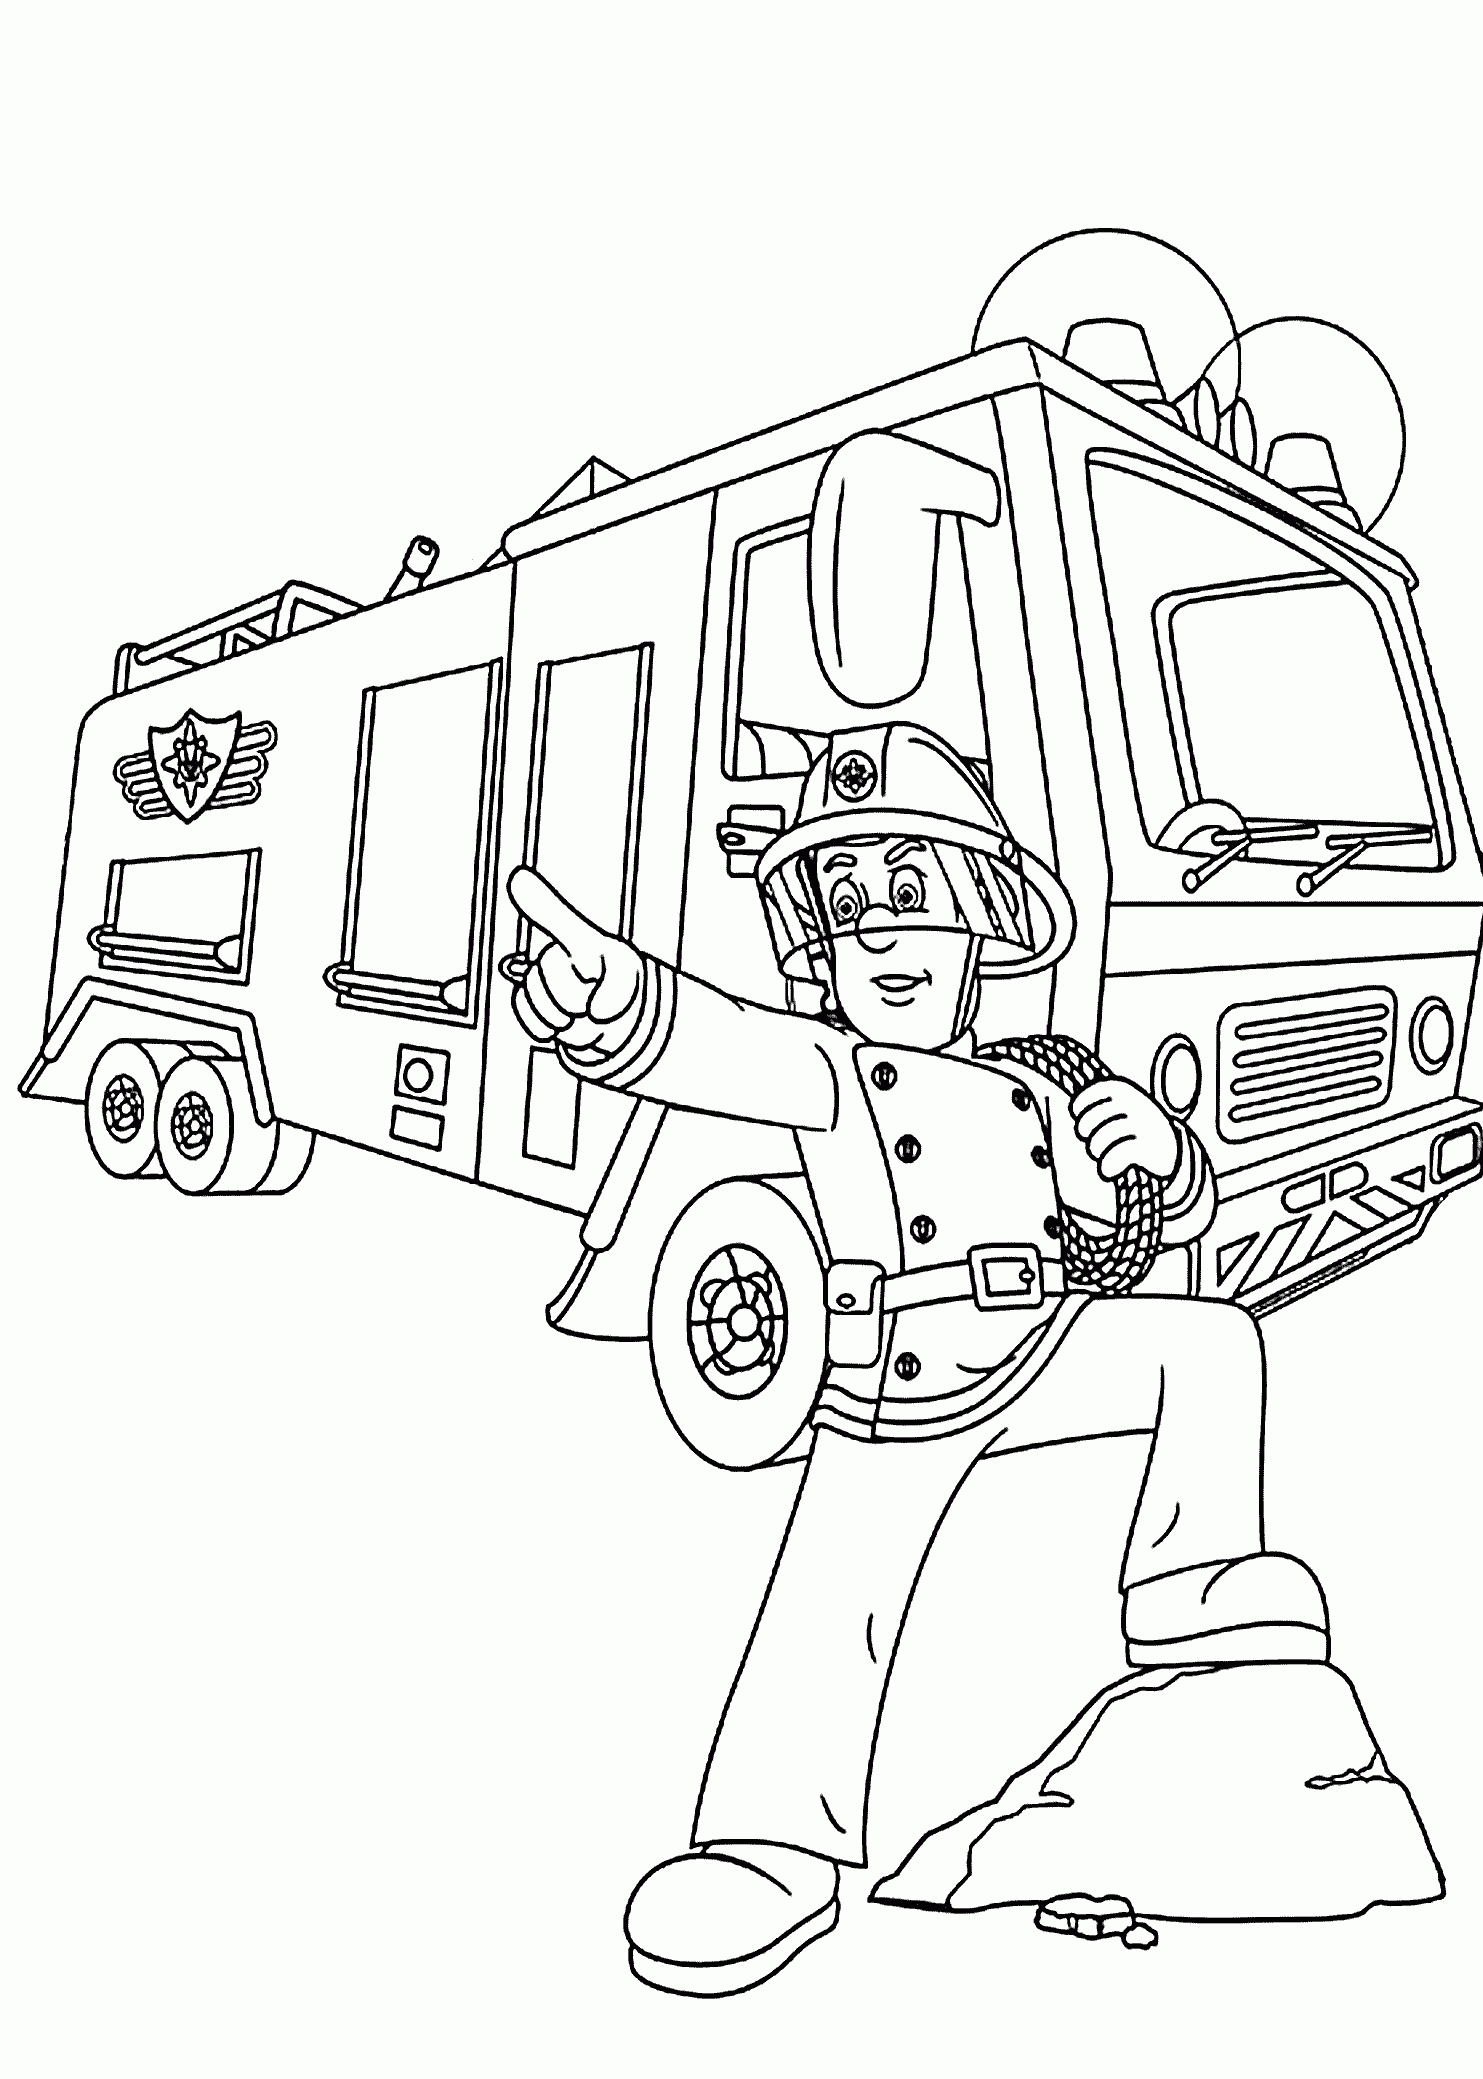 Firetruck Coloring Pages For Kids, Printable Free bei Feuerwehrmann Sam Malvorlage